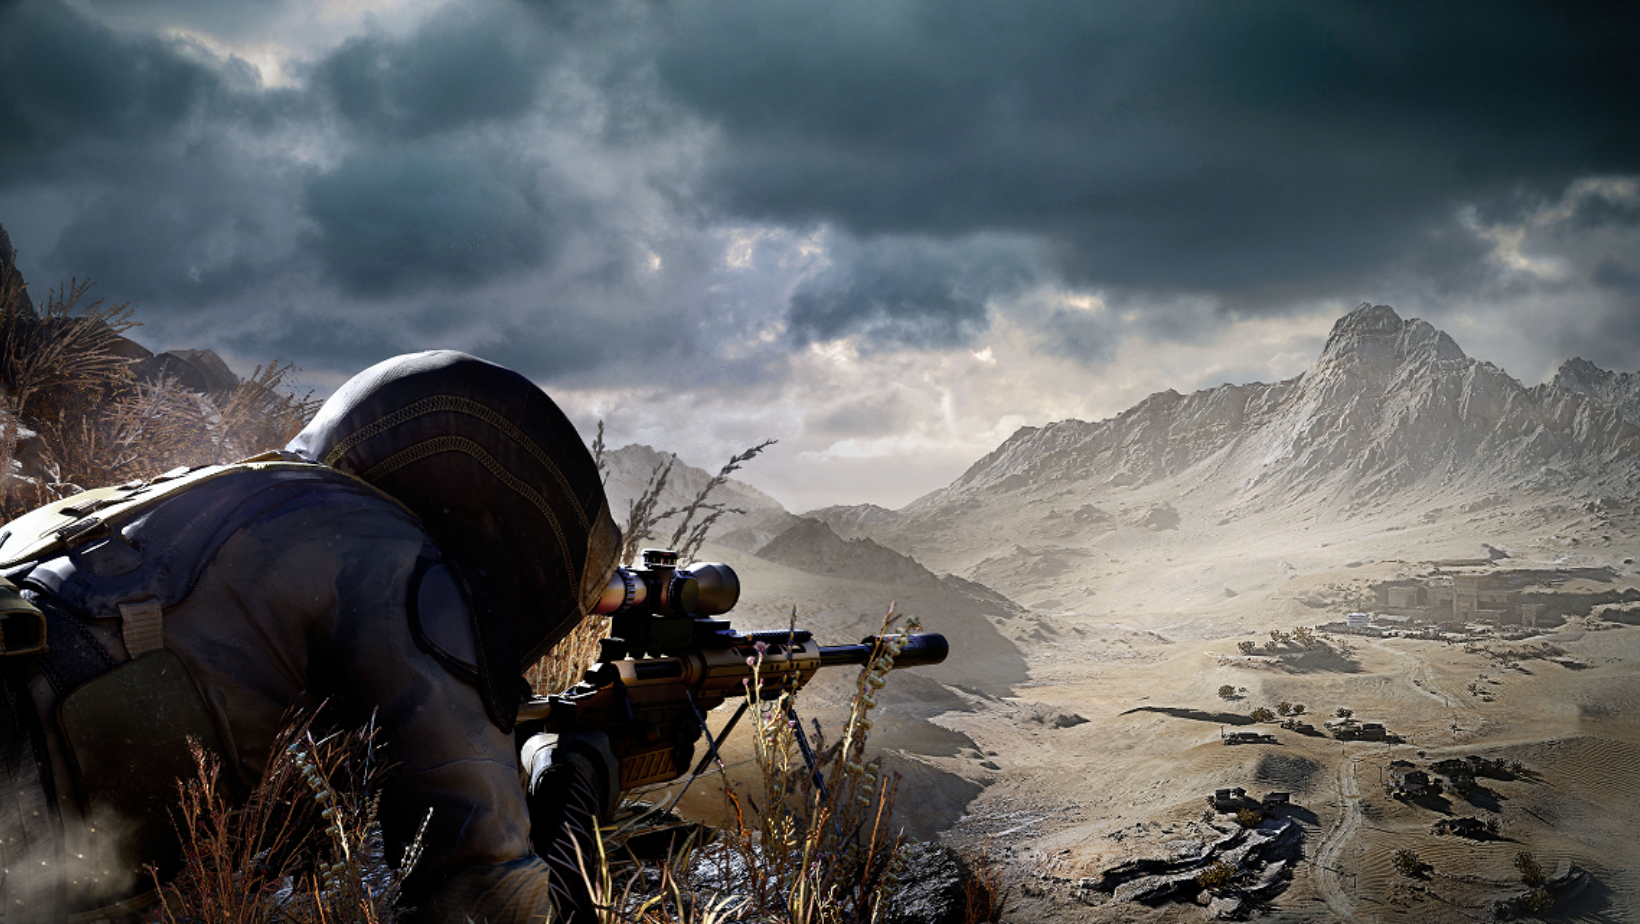 Review – Sniper: Ghost Warrior Contracts 2